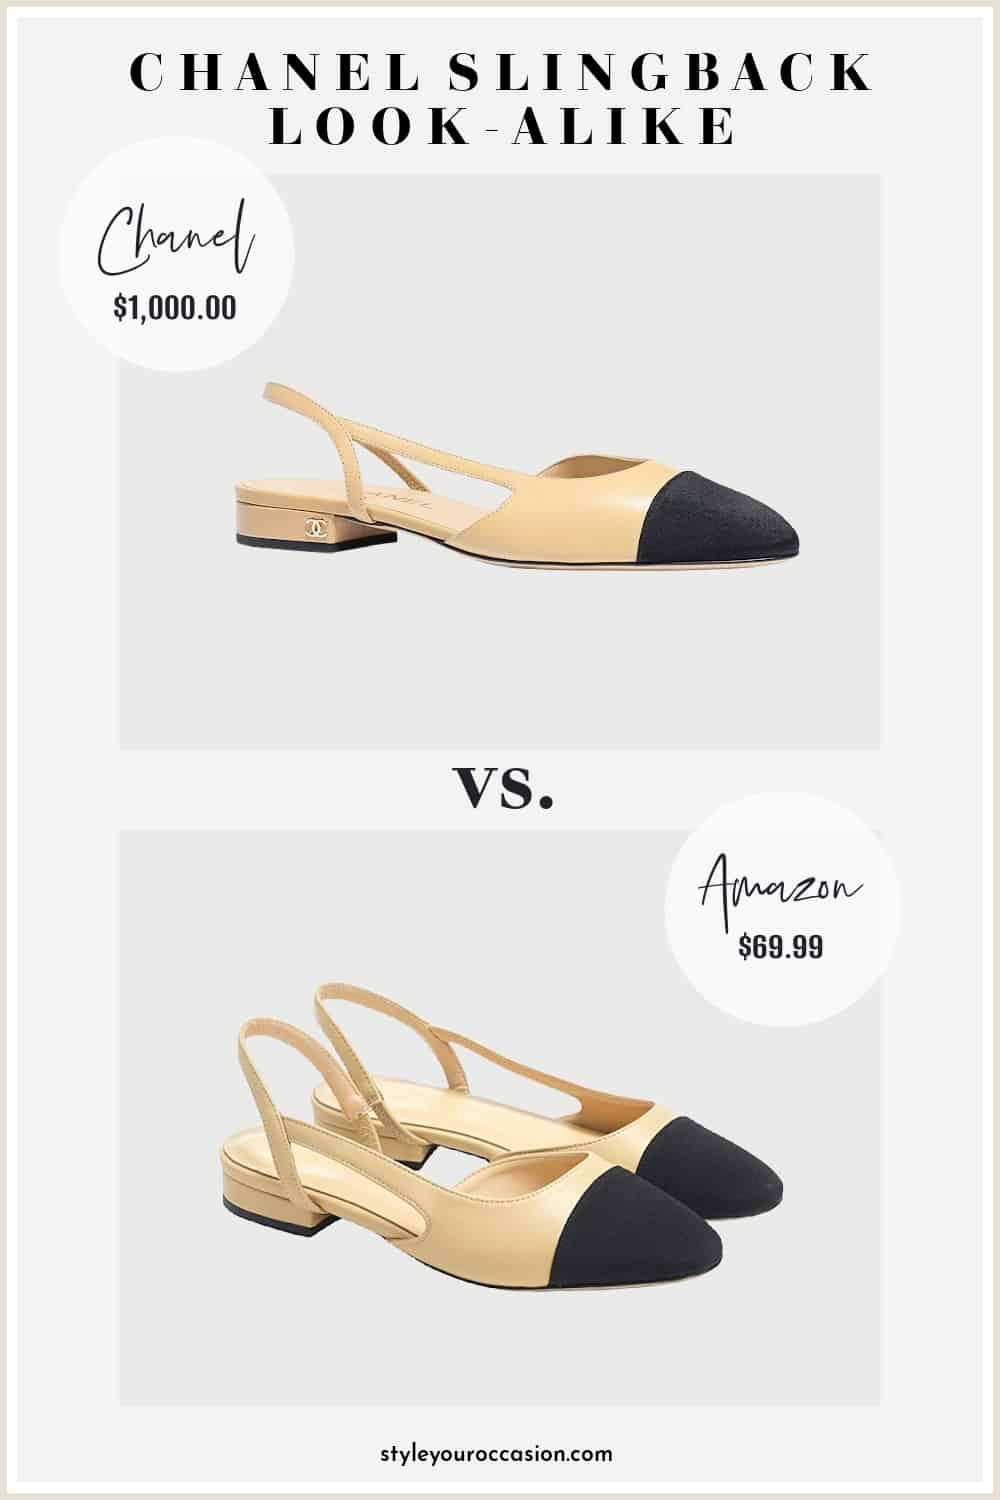 image comparing a low Chanel slingback pump with a look-alike shoe